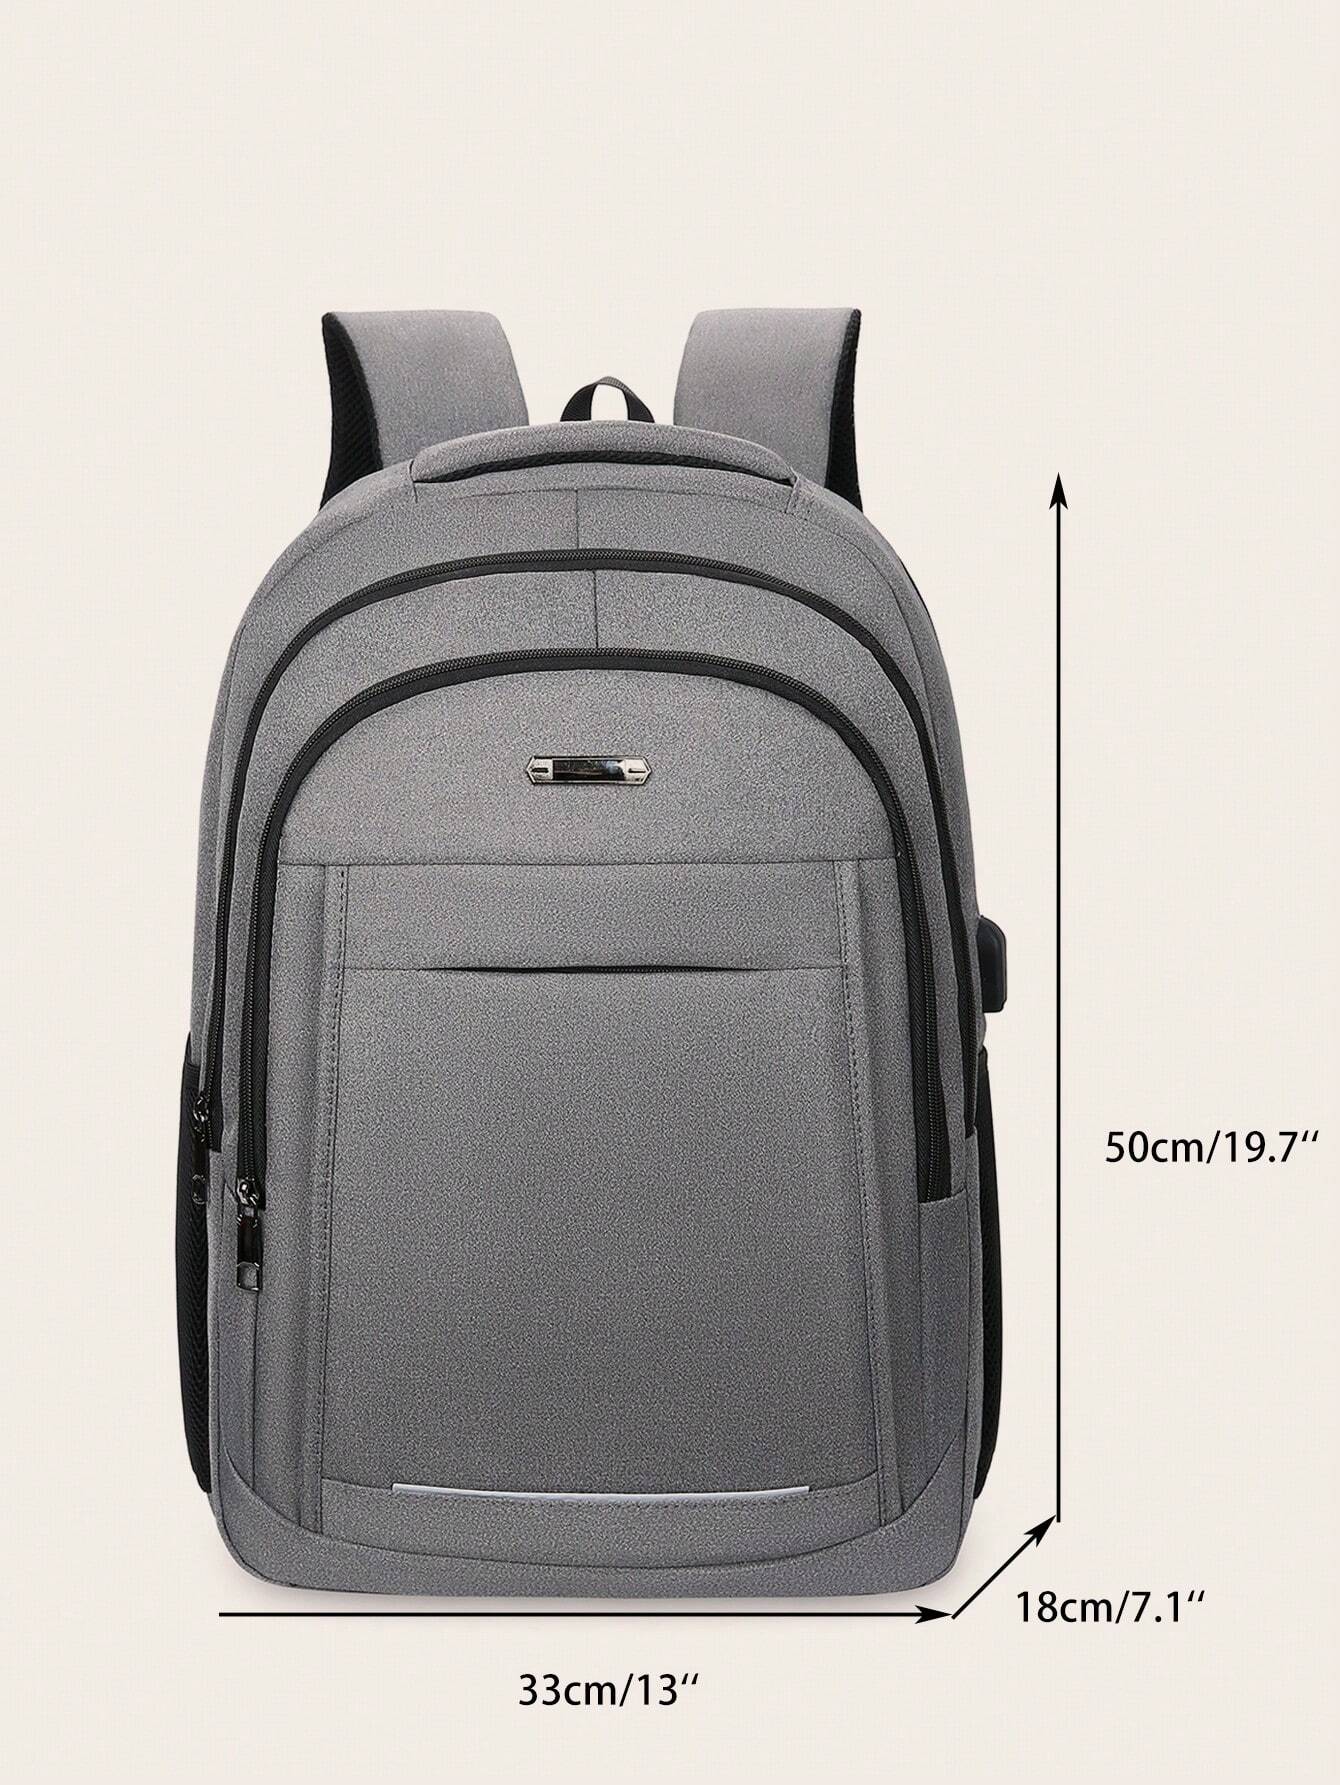 Medium Laptop Backpack Grey Minimalist With USB Charging Port For Business